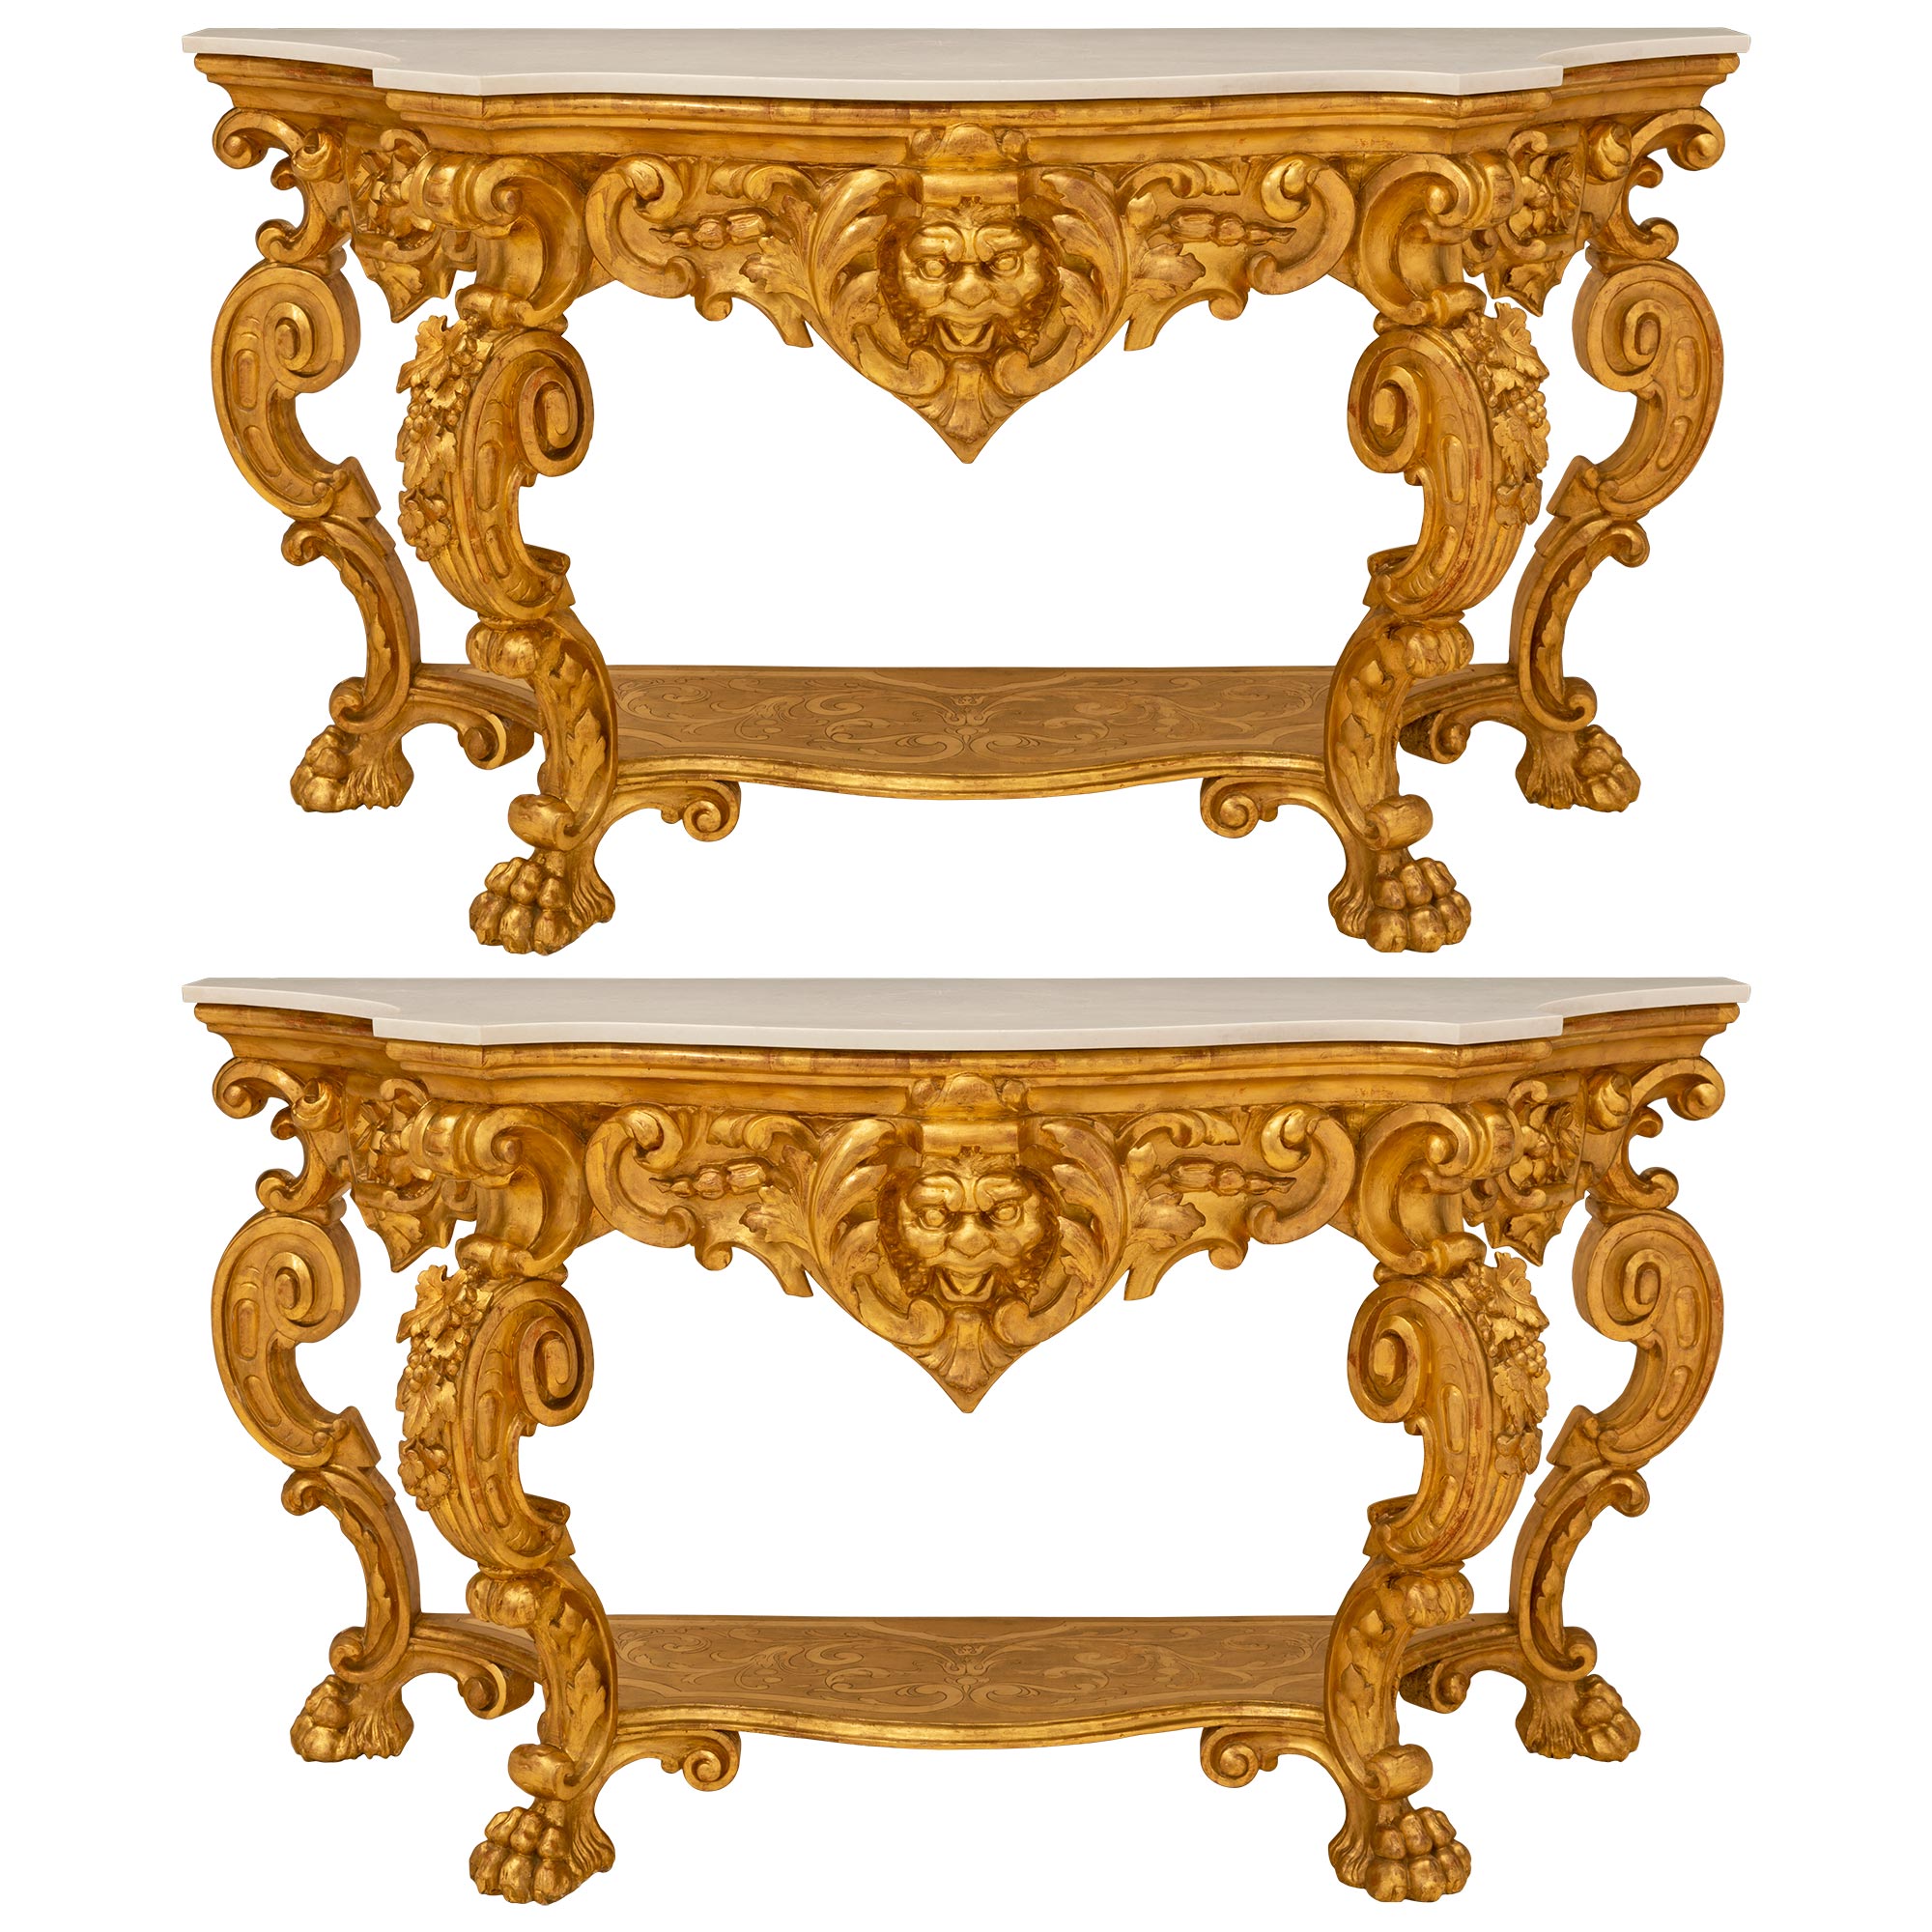 Pair of Italian Early 19th Century Freestanding Lombardi Two-Tier Consoles